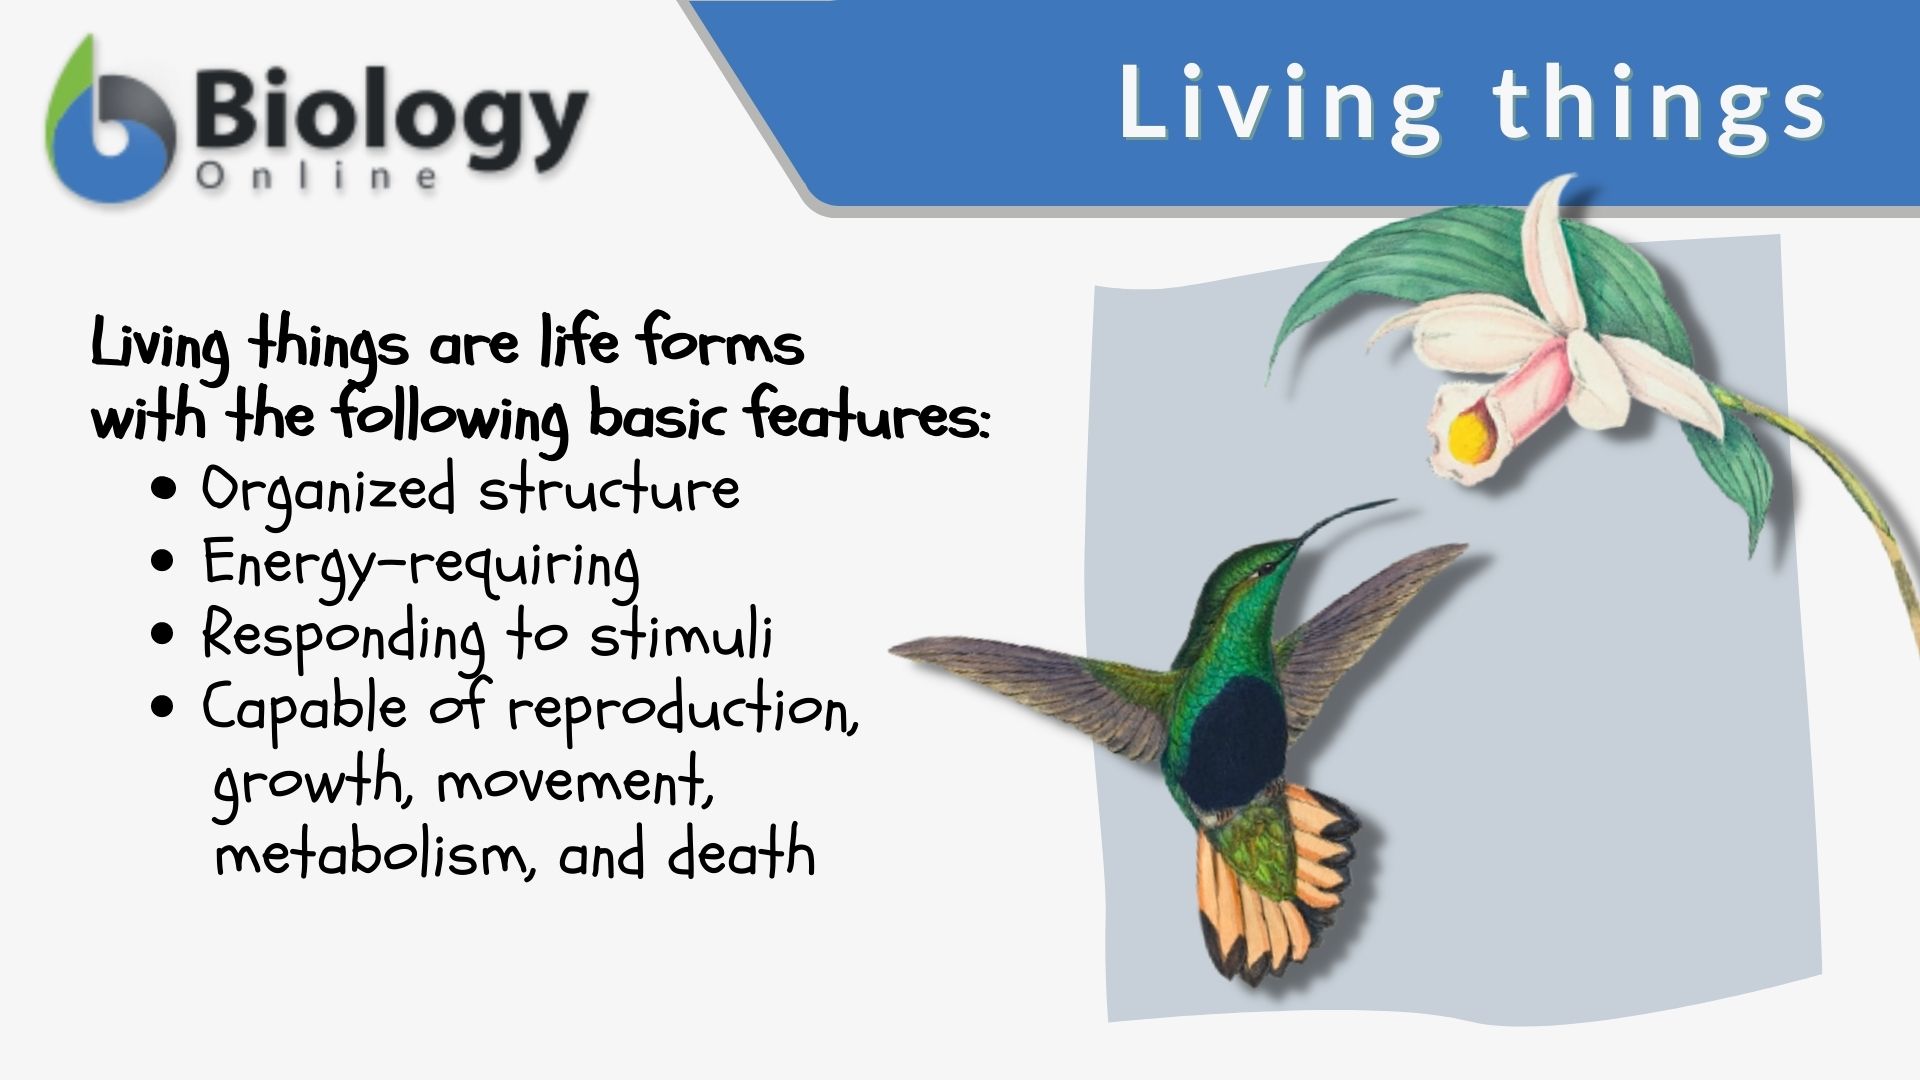 Living things - Definition and Examples - Biology Online Dictionary